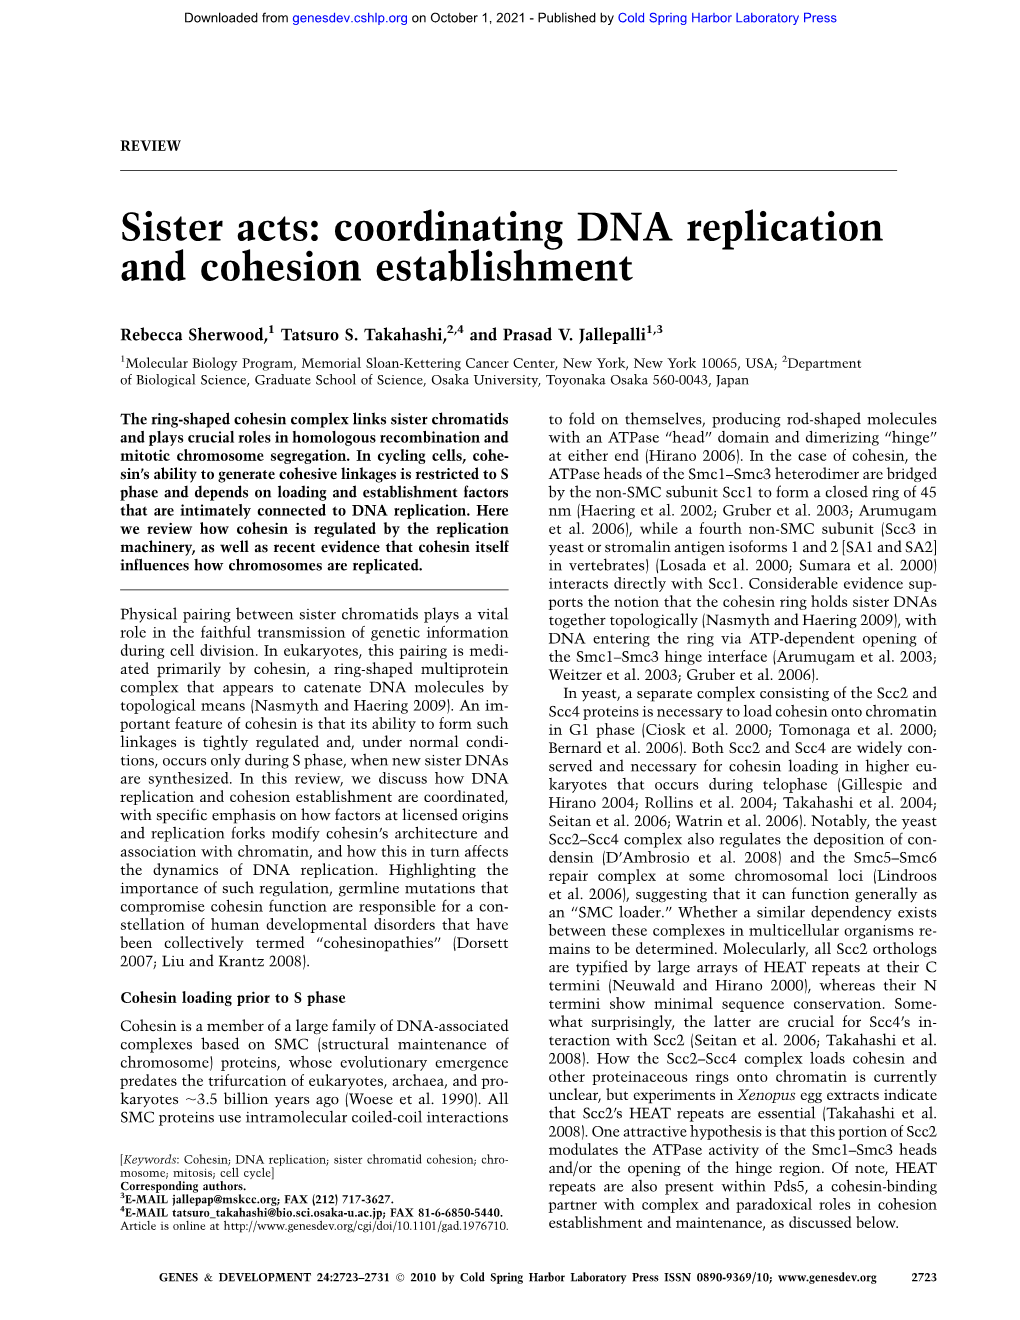 Sister Acts: Coordinating DNA Replication and Cohesion Establishment